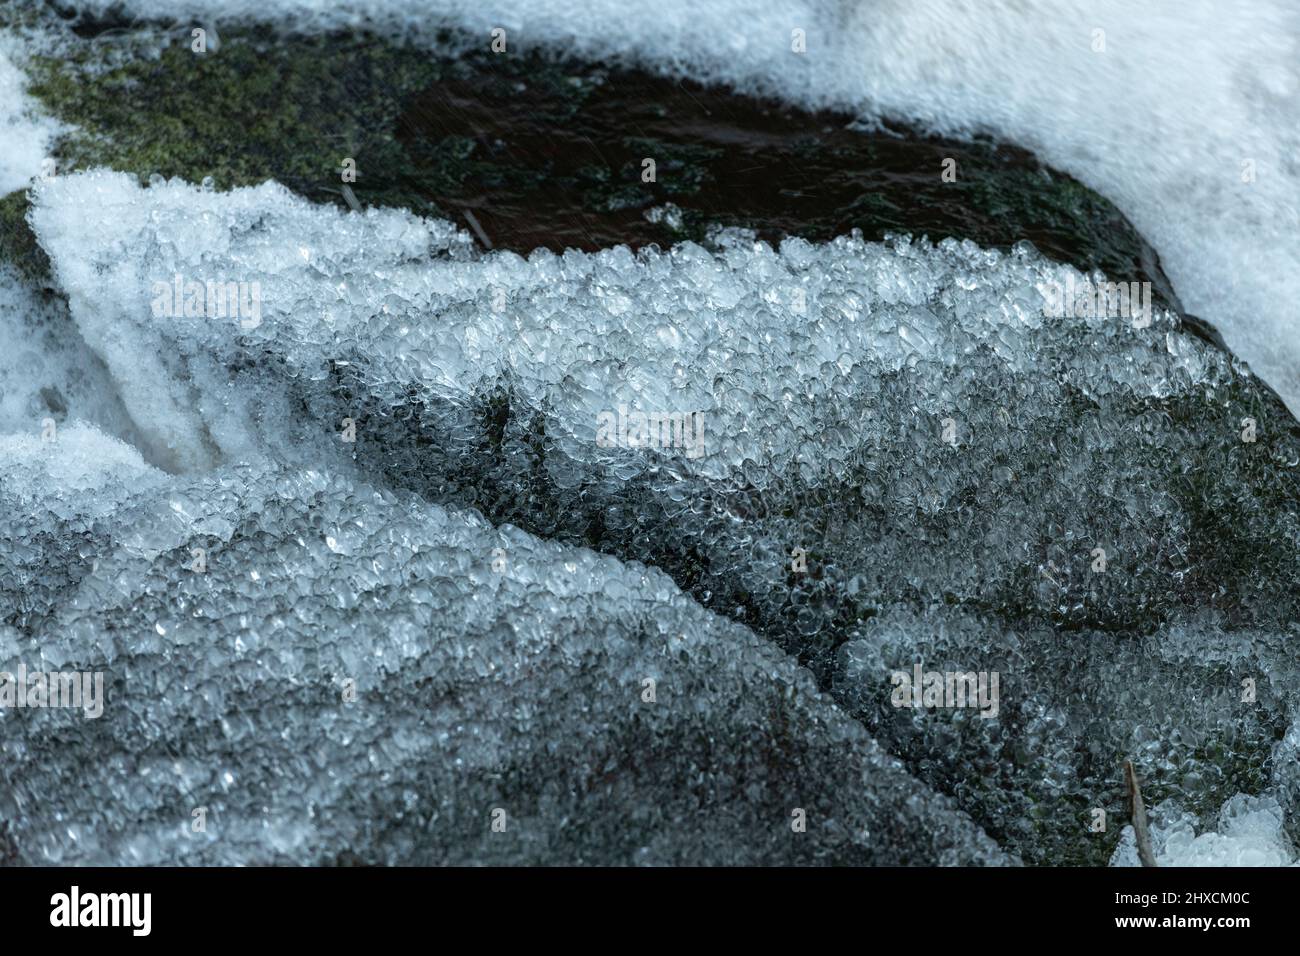 Ice crystals on a stone, Torup, Halland, Sweden Stock Photo